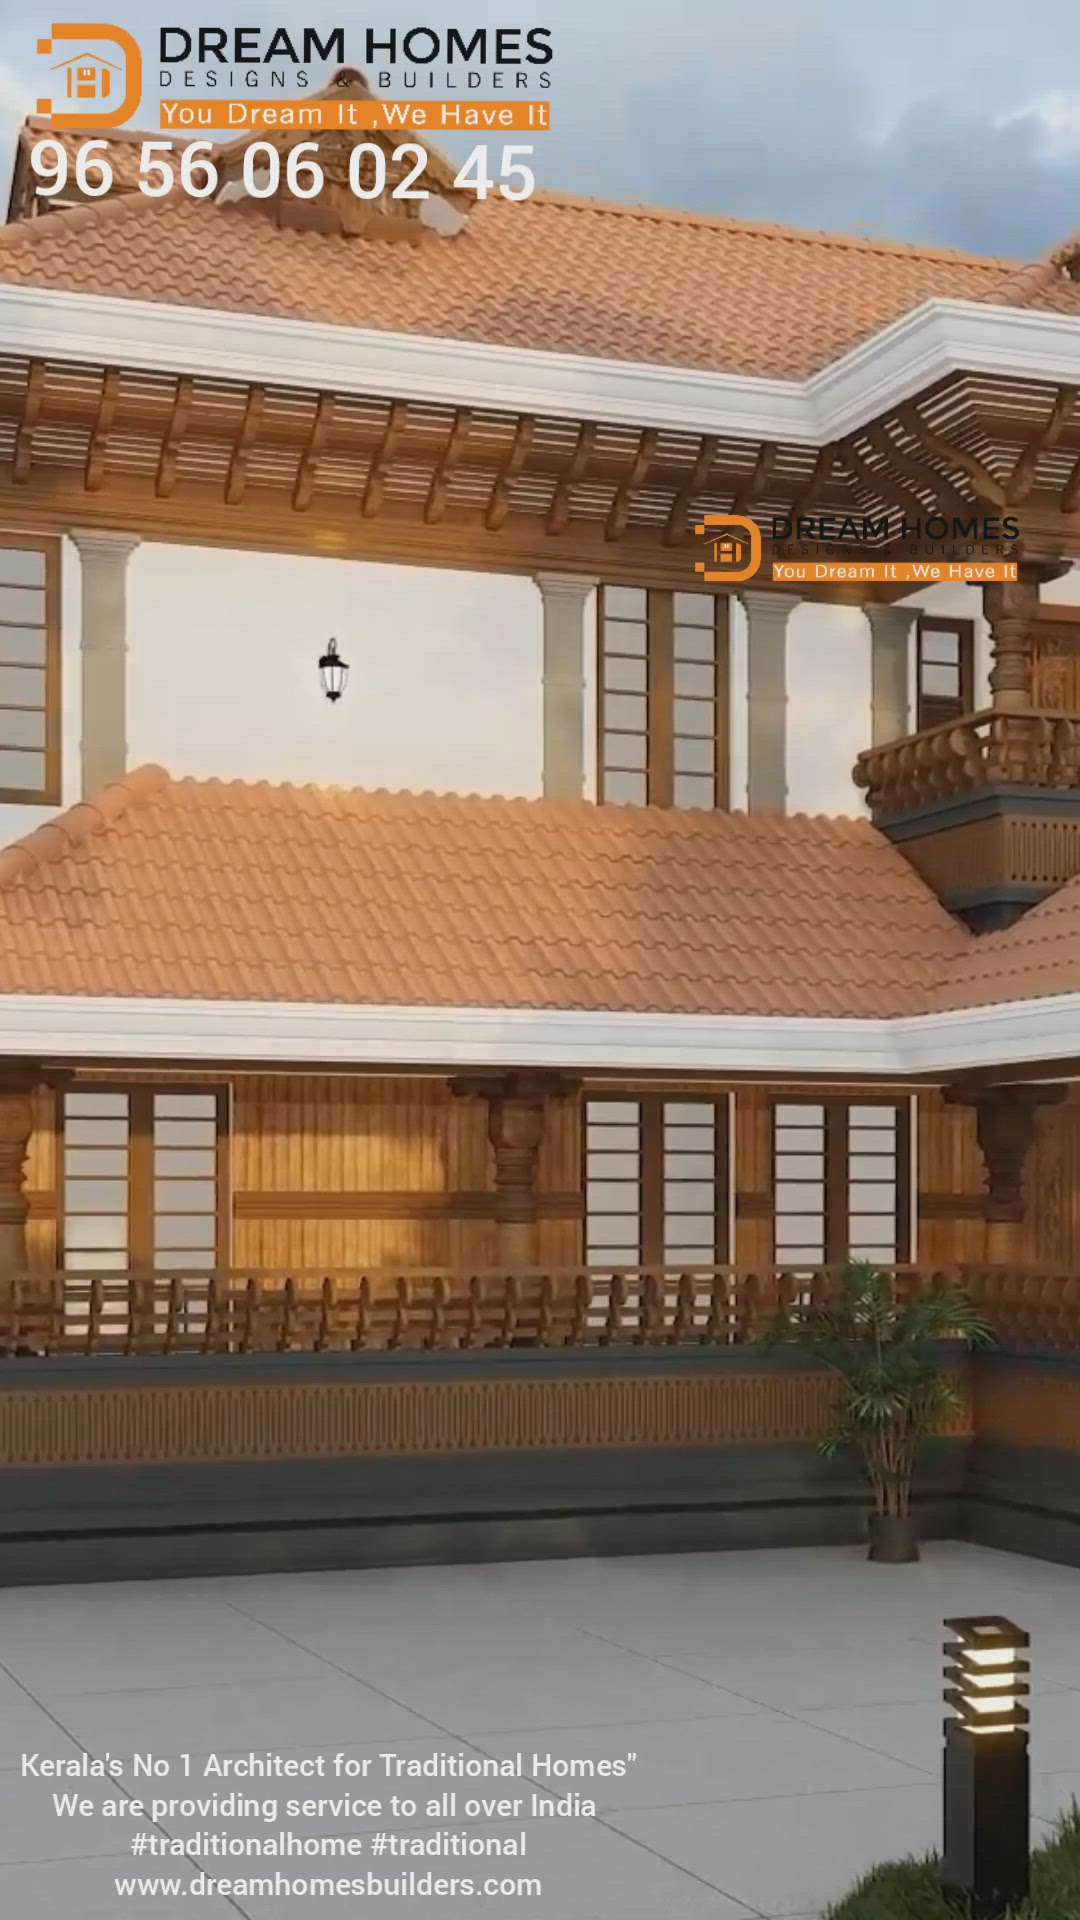 "DREAM HOMES DESIGNS & BUILDERS"

👇Looking for a perfect Vasthu rich Traditional Home?

Have a look at one of our traditional home
that perfectly blend beauty with ergonomic designs.
            
You Dream It, We Have It'

       "Kerala's No 1 Architect for Traditional Homes"

#traditionalhome #traditional

No Compromise on Quality, Sincerity & Efficiency.
For more info

9656060245
7902453187

www.dreamhomesbuilders.com

https://youtu.be/rRGp27_rjfc